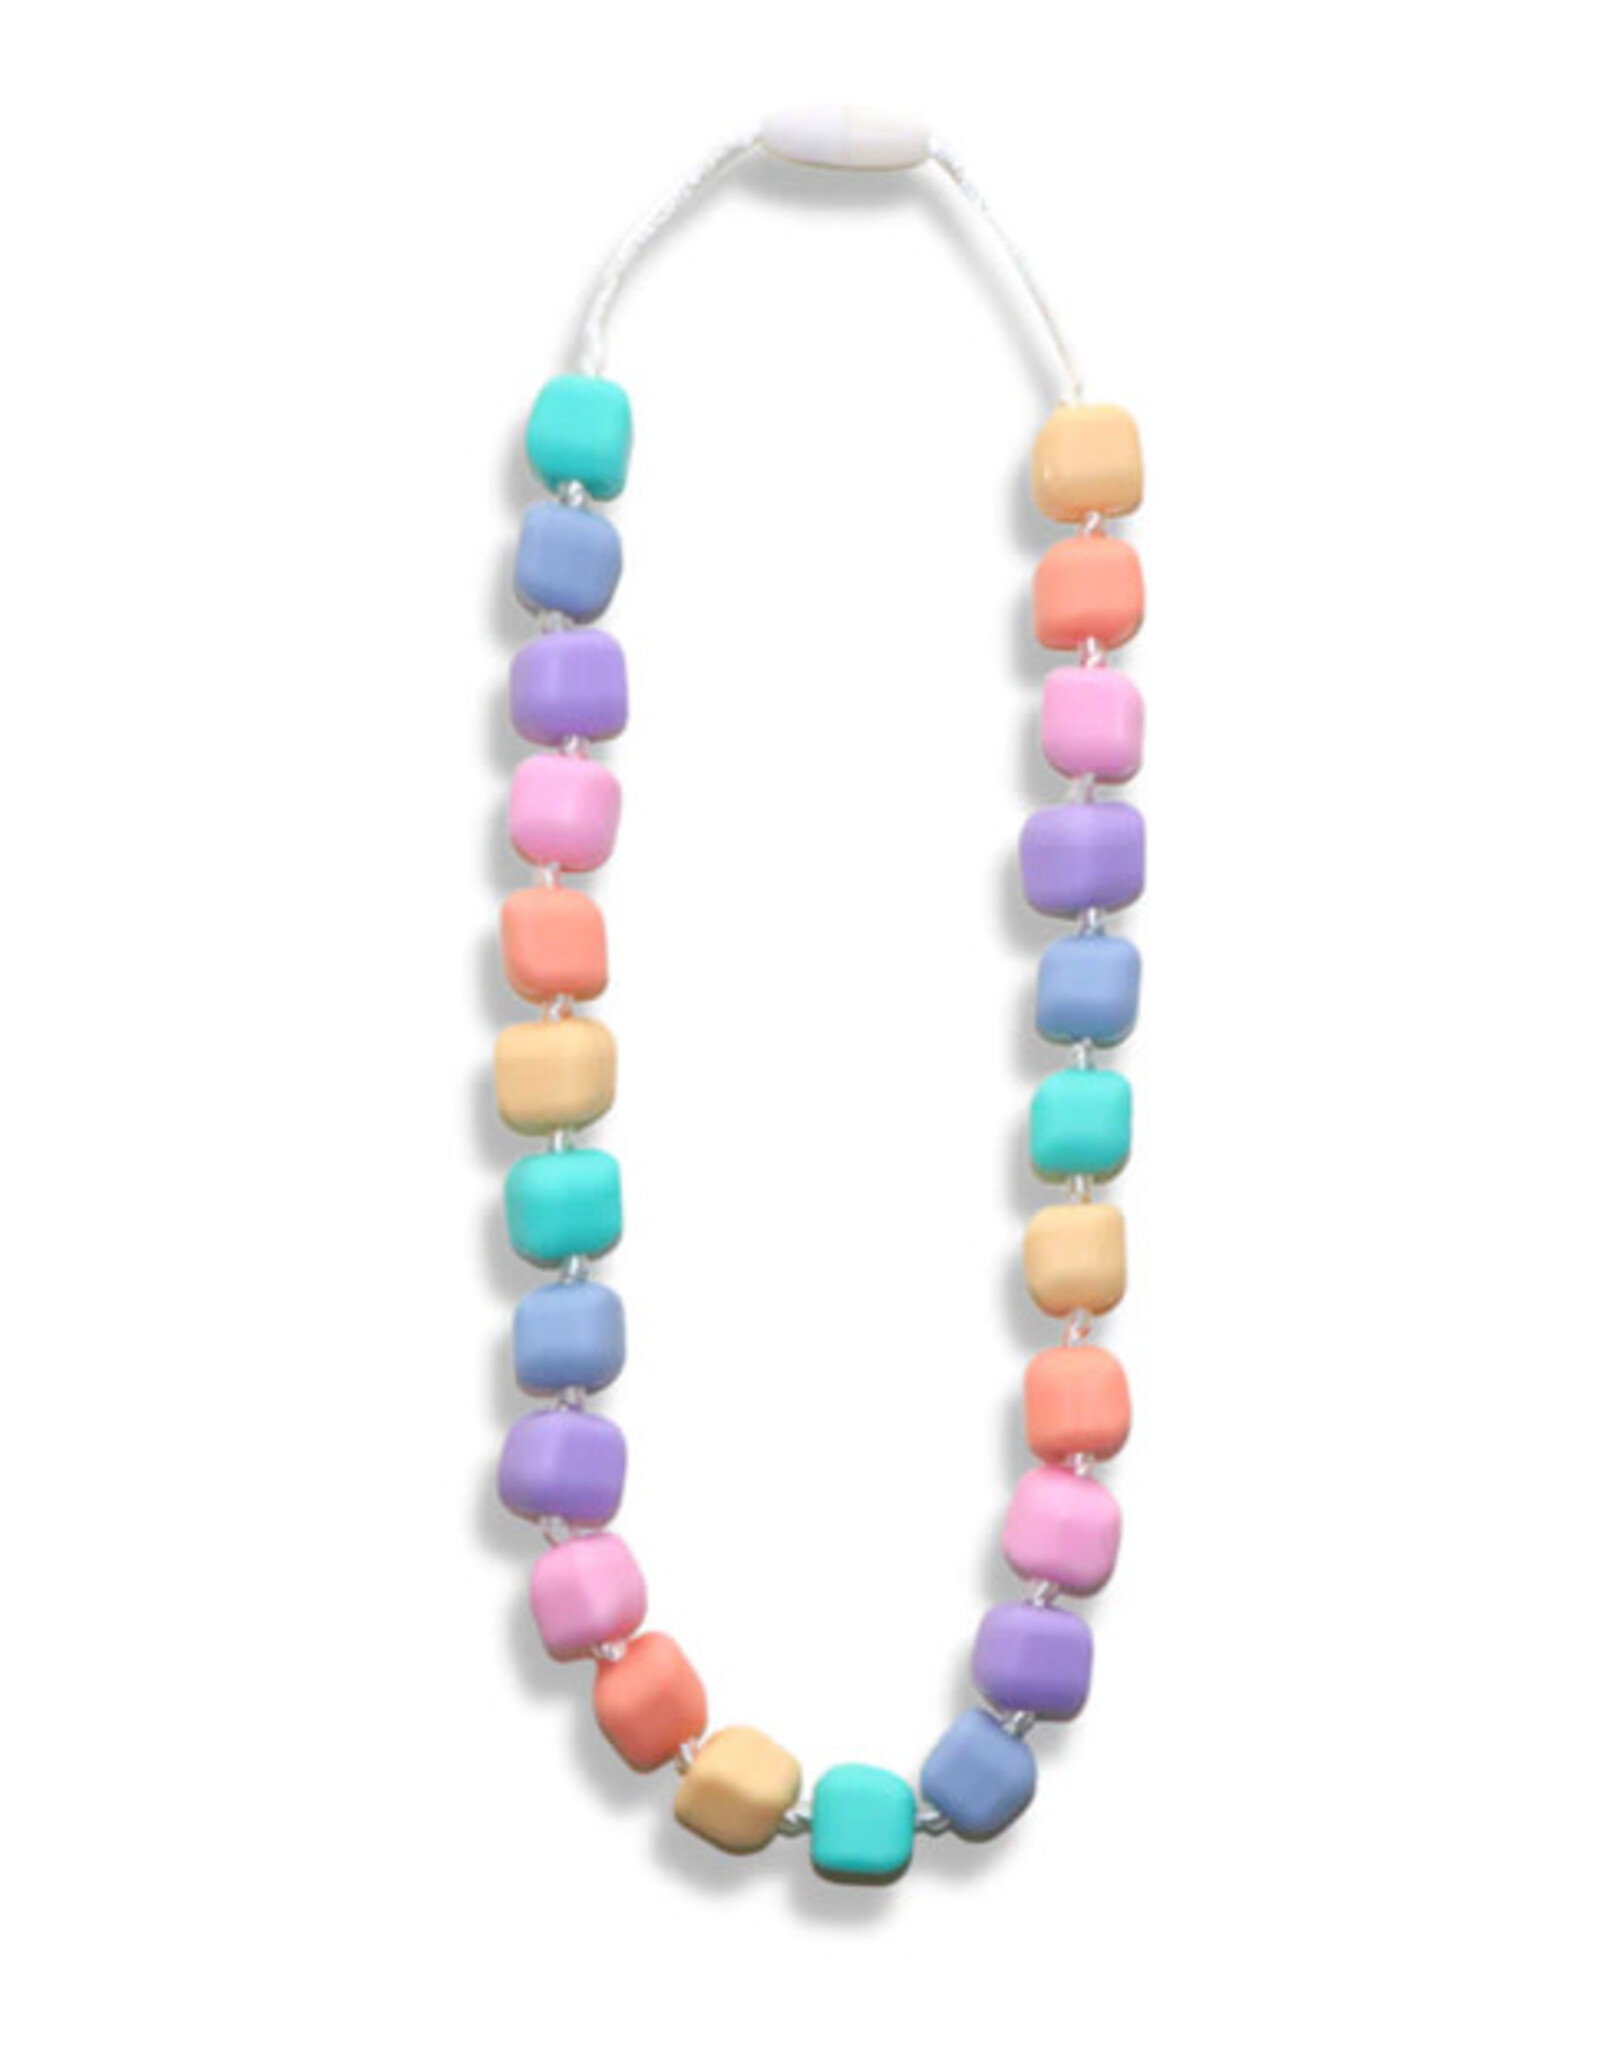 Jellystone Princess and the Pea Necklace-Rainbow Pastel